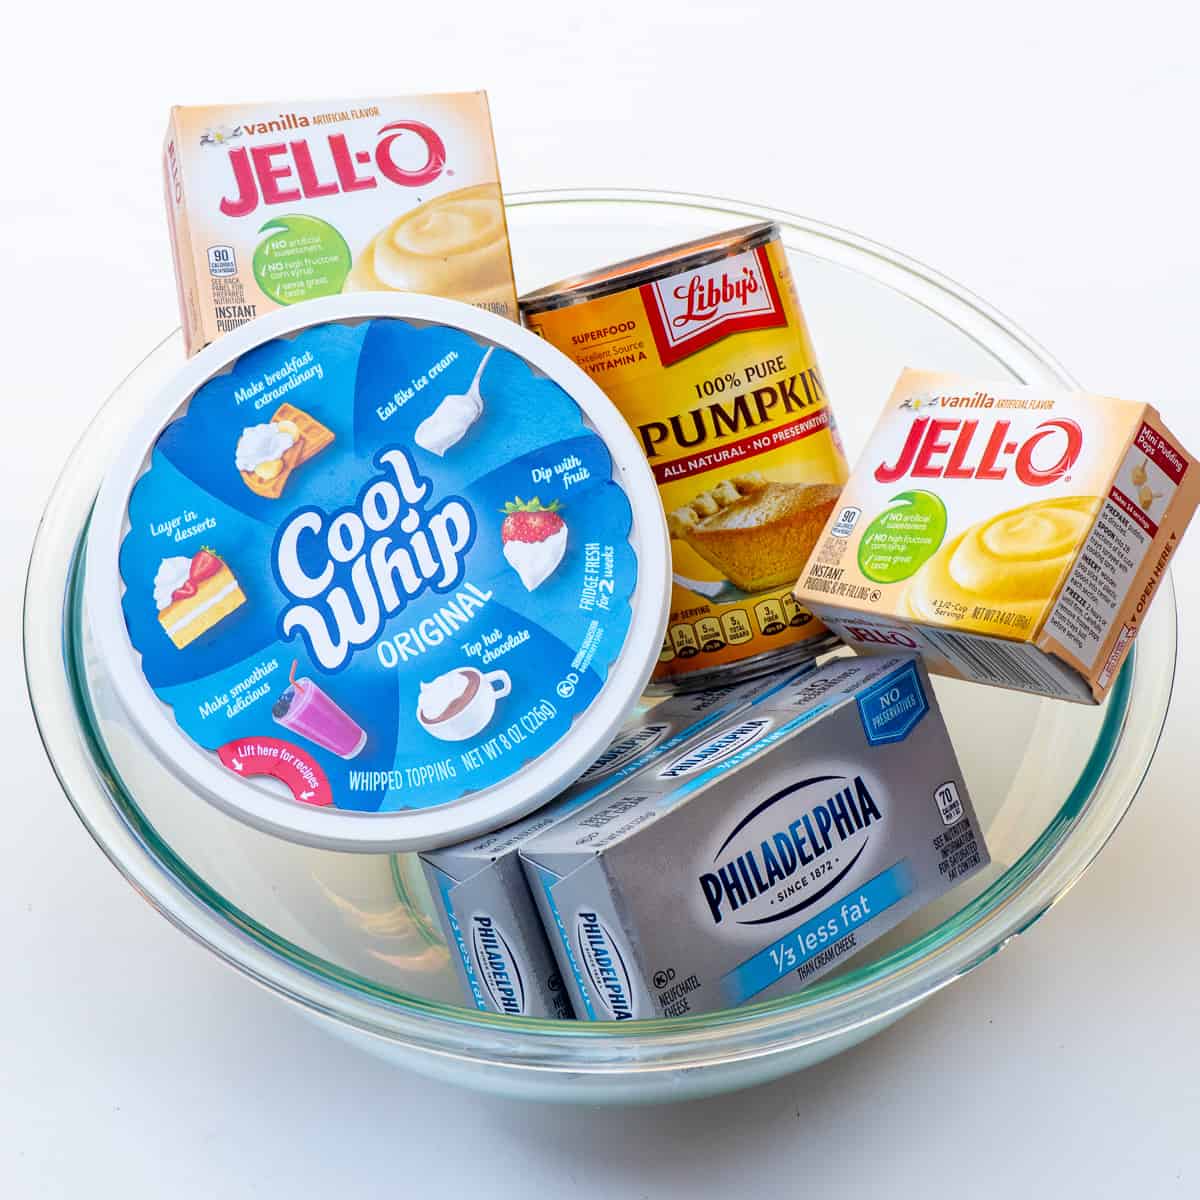 A tub of Cool Whip, can of pumpkin puree, two boxes of Jello pudding and two boxes of cream cheese in a glass bowl.